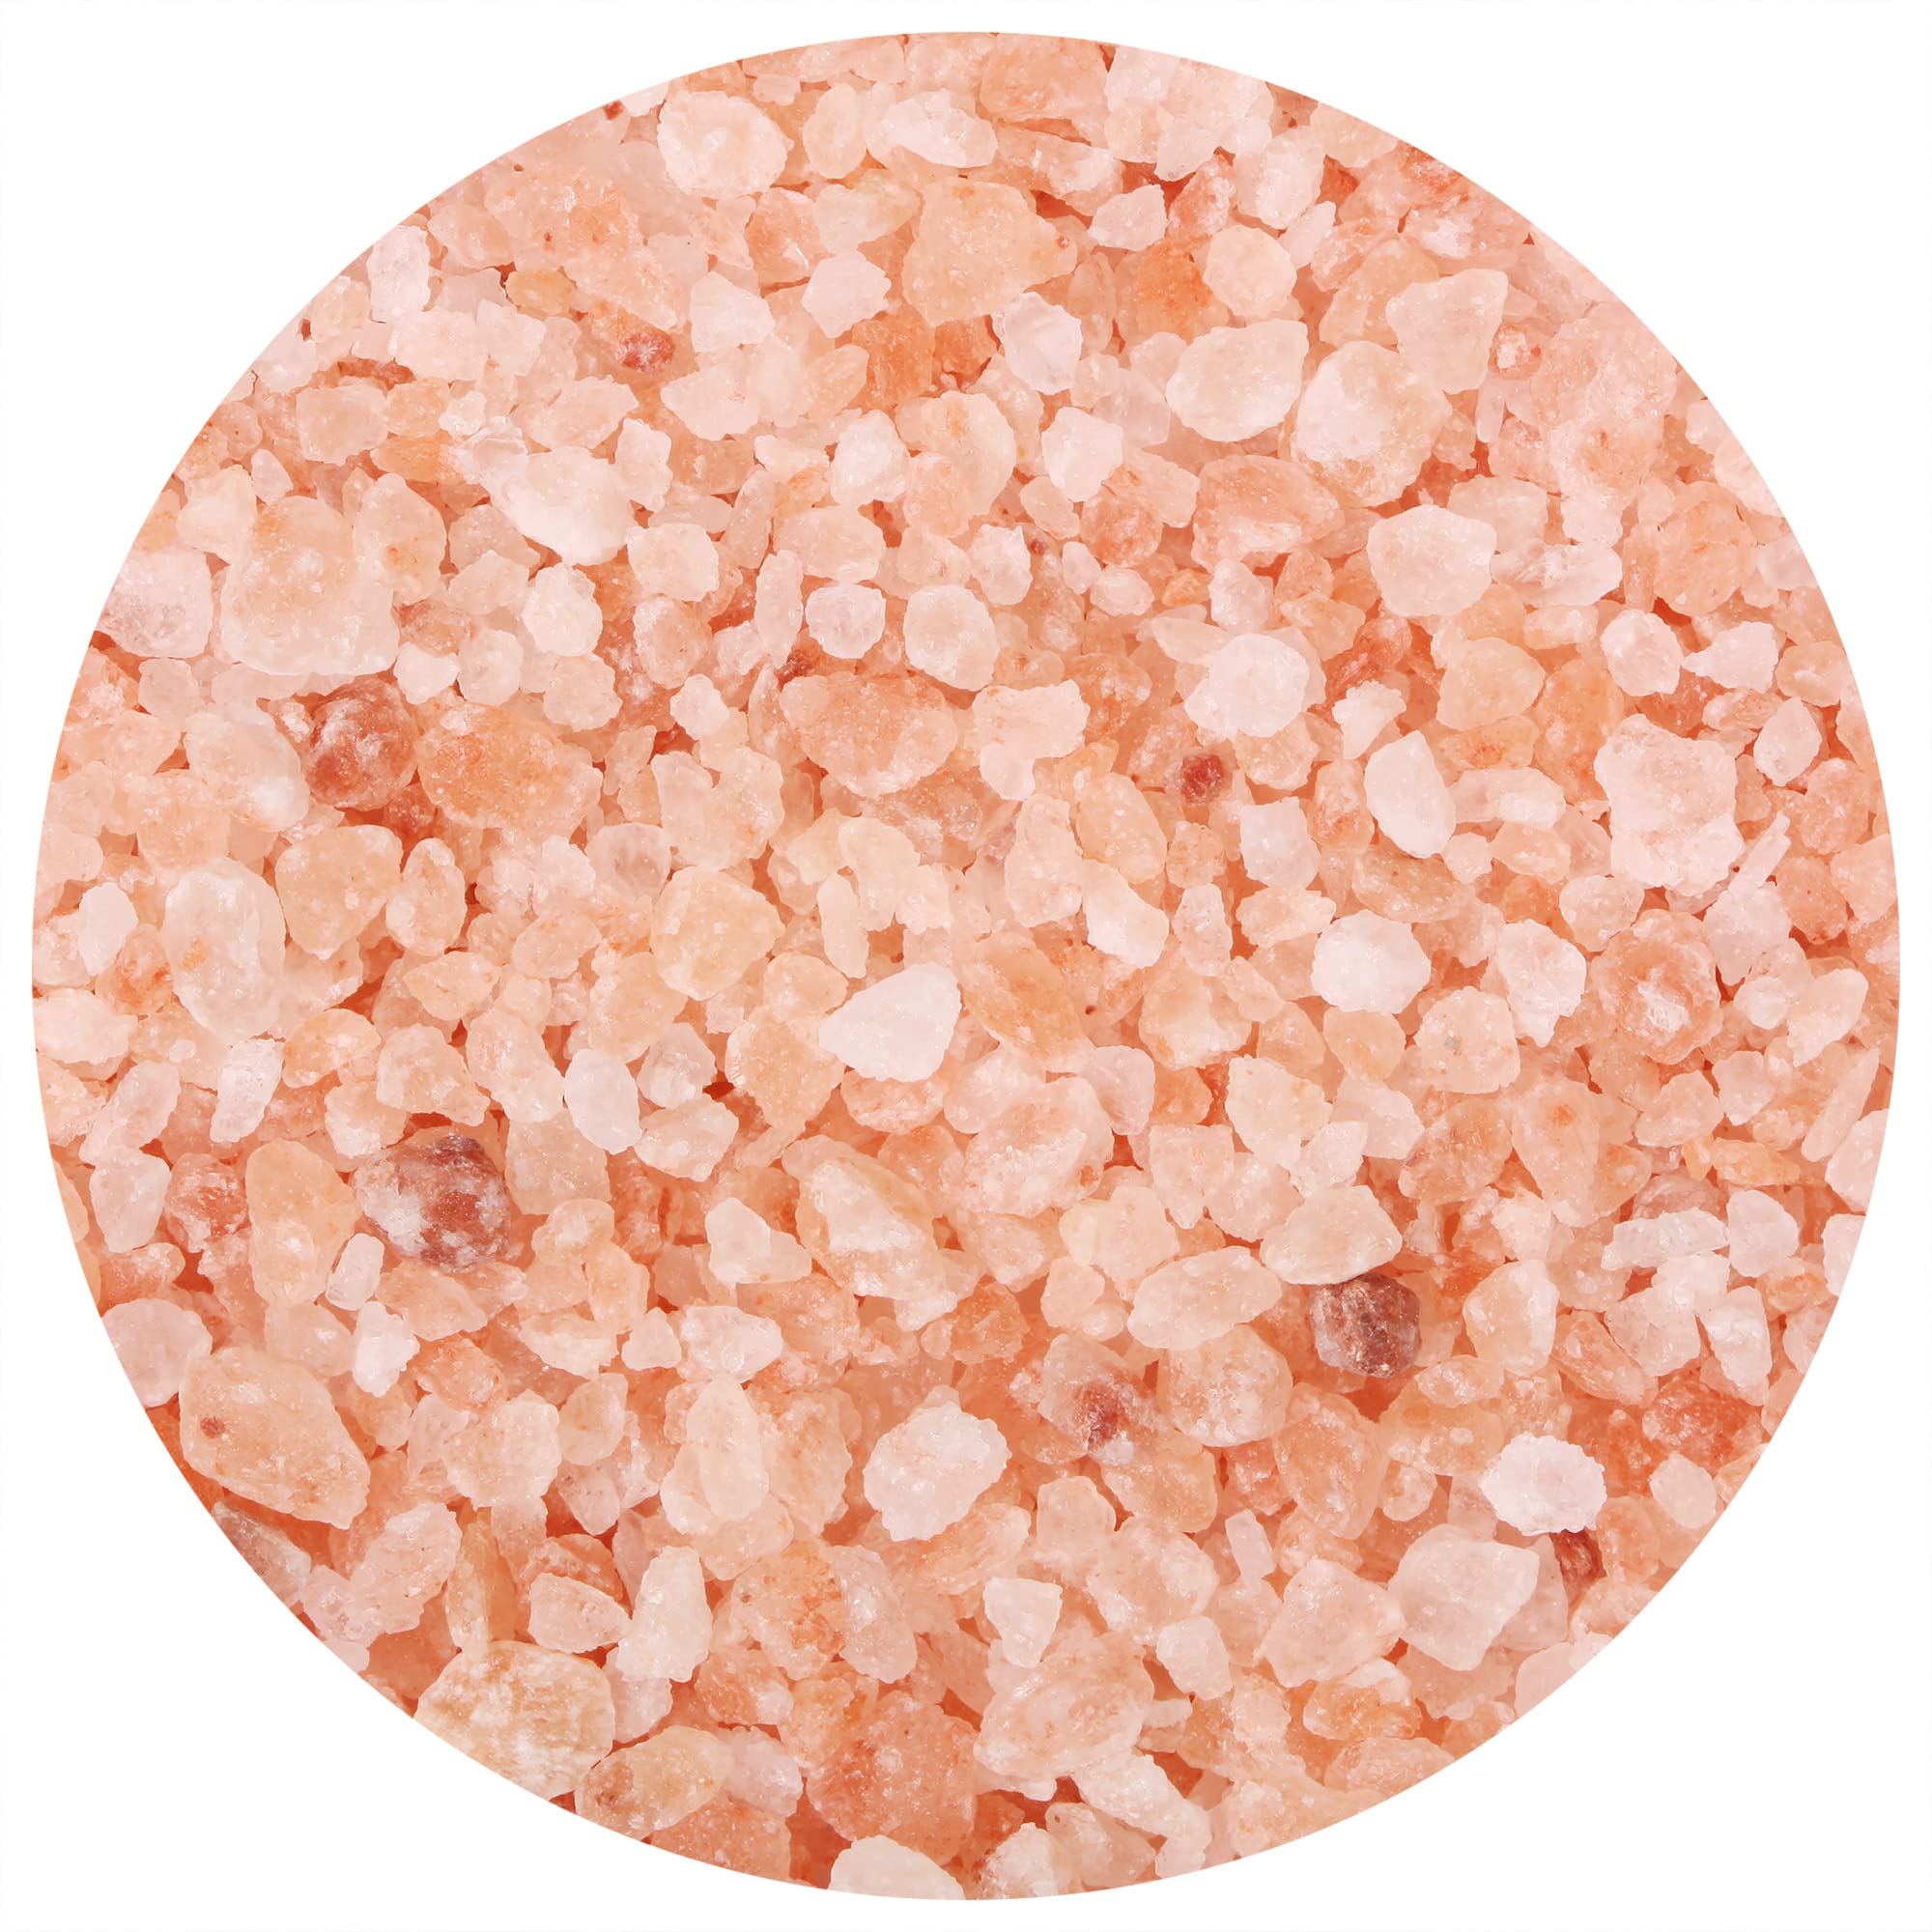 The Spice Lab Himalayan Salt - Coarse 10 Pounds - Pink Himalayan Salt is Nutrient and Mineral Dense for Health - Gourmet Pure Crystal - Gourmet Pur...